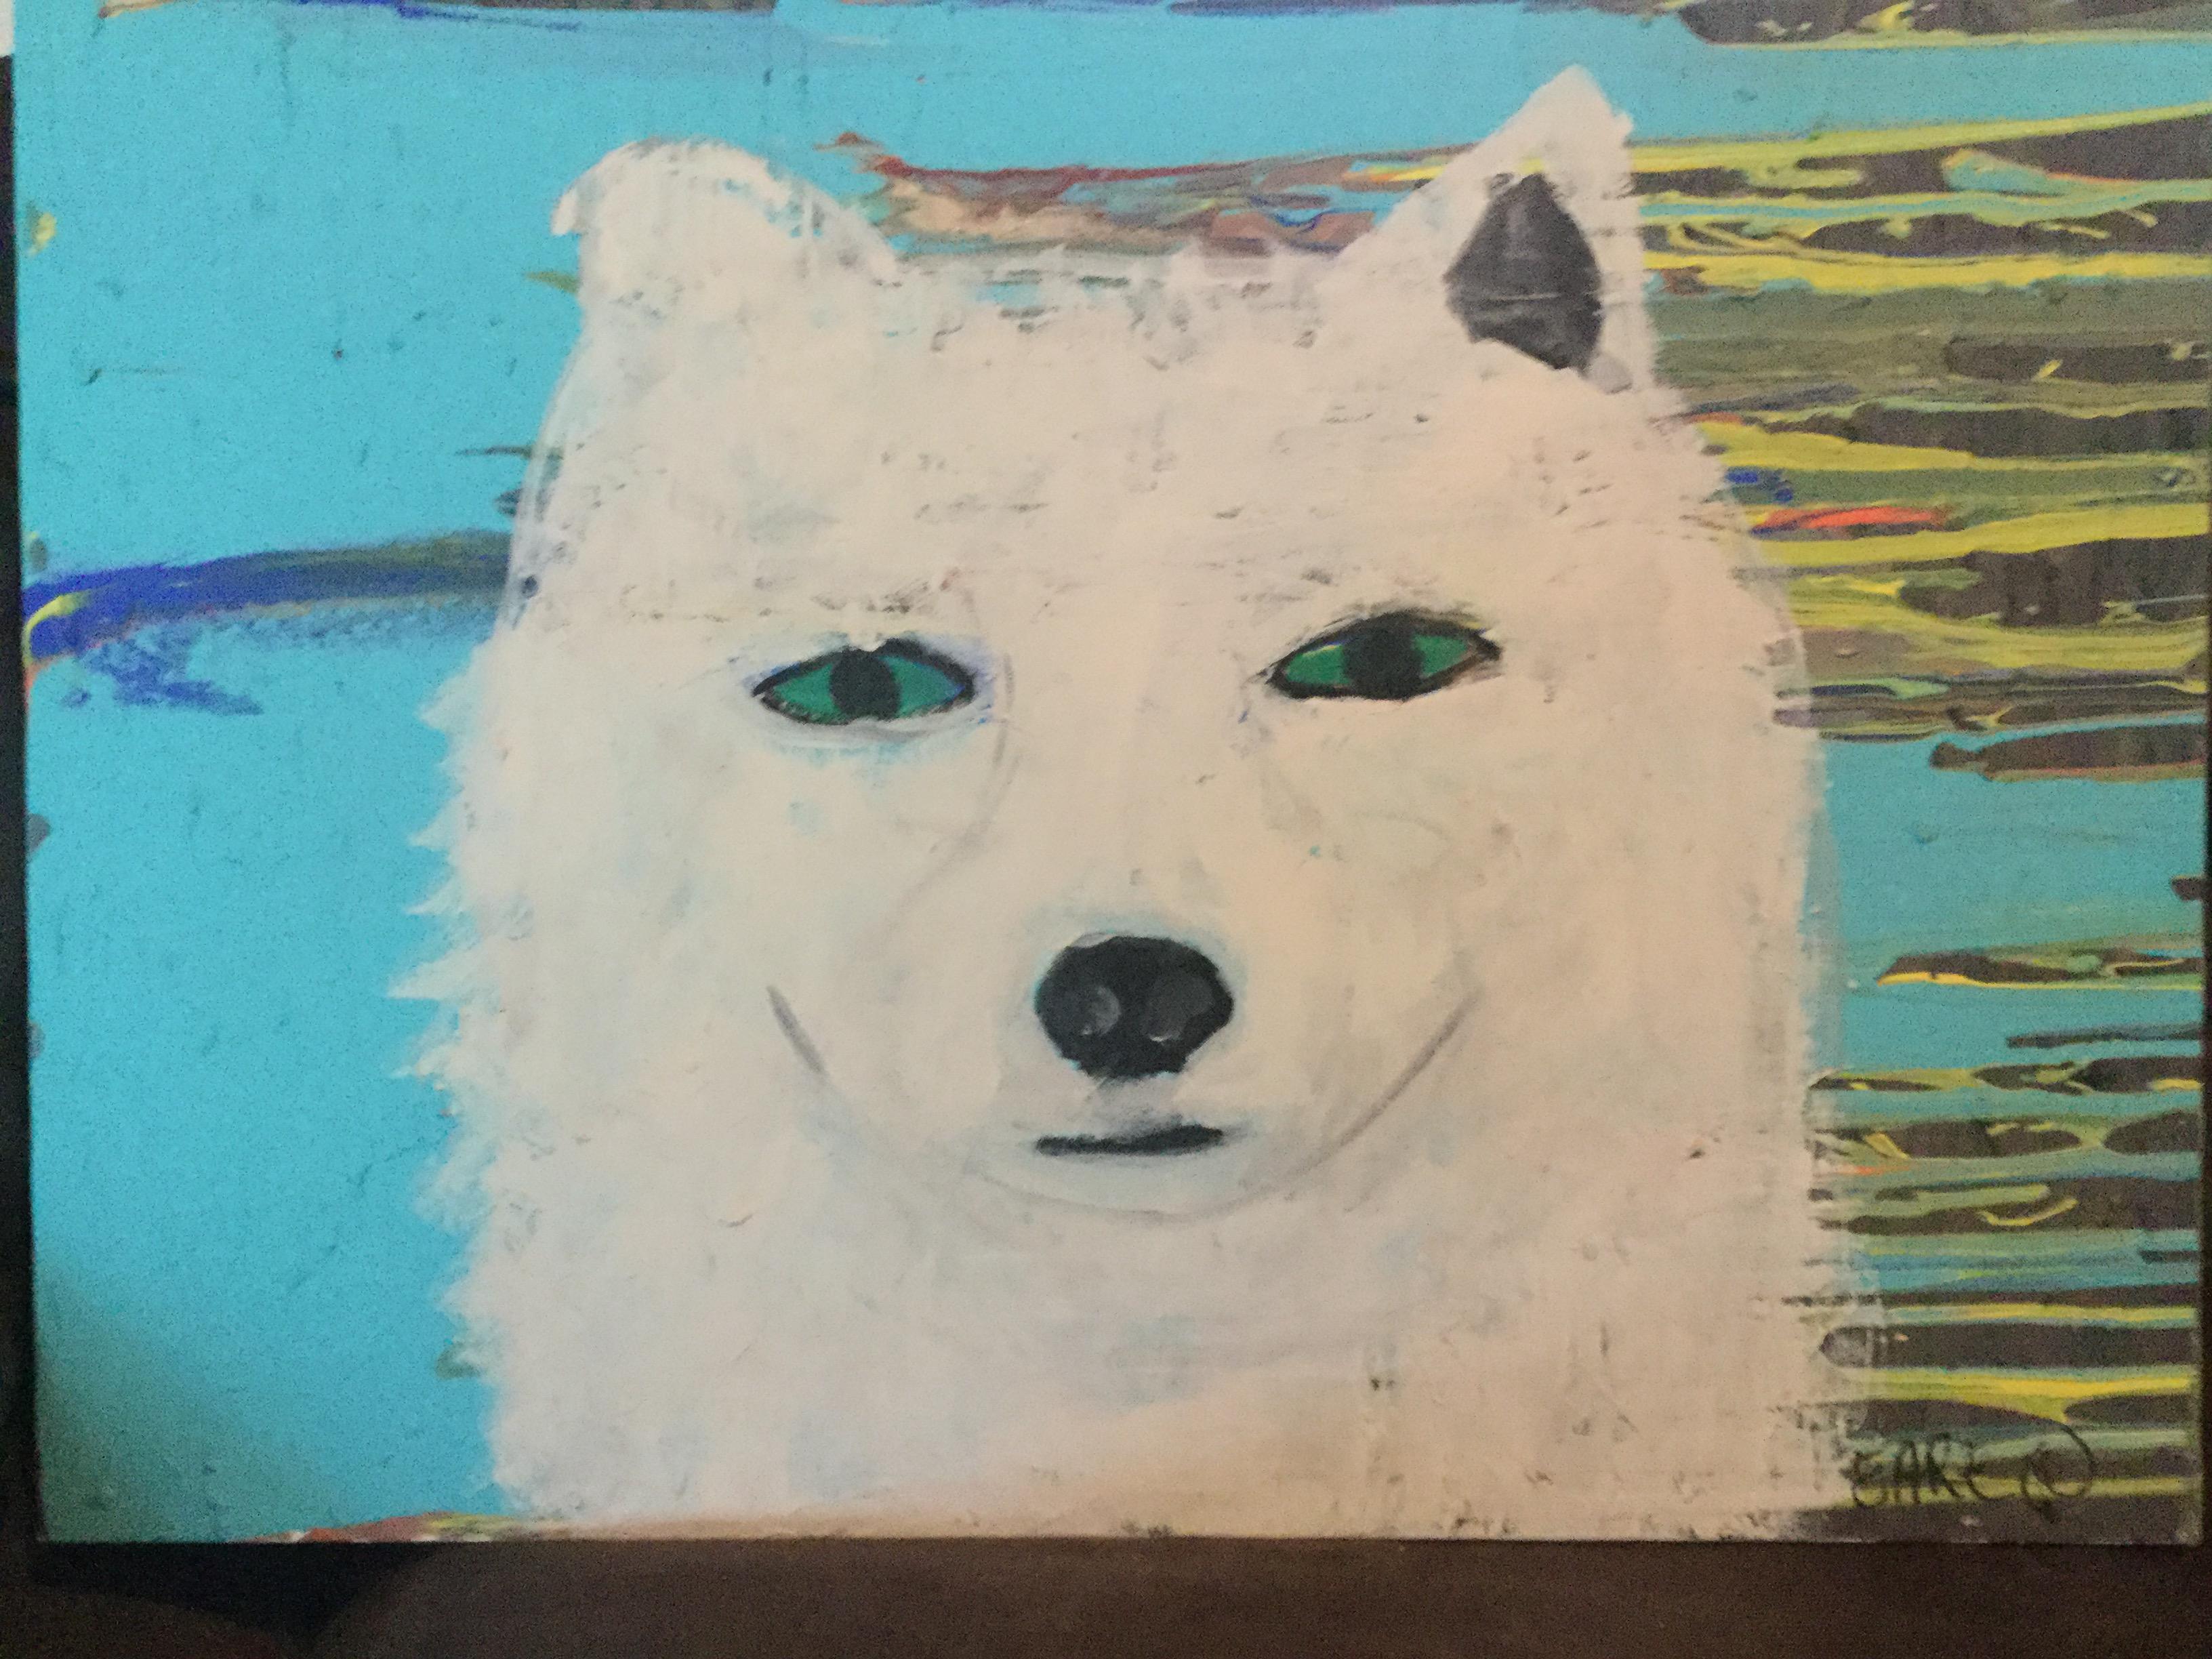 Outsider art painting of a dog. Looks like a malamute or husky. Acrylic on canvas. Signed Earl. Earl Swanigen in a well-known folk painter in Hudson, NY.